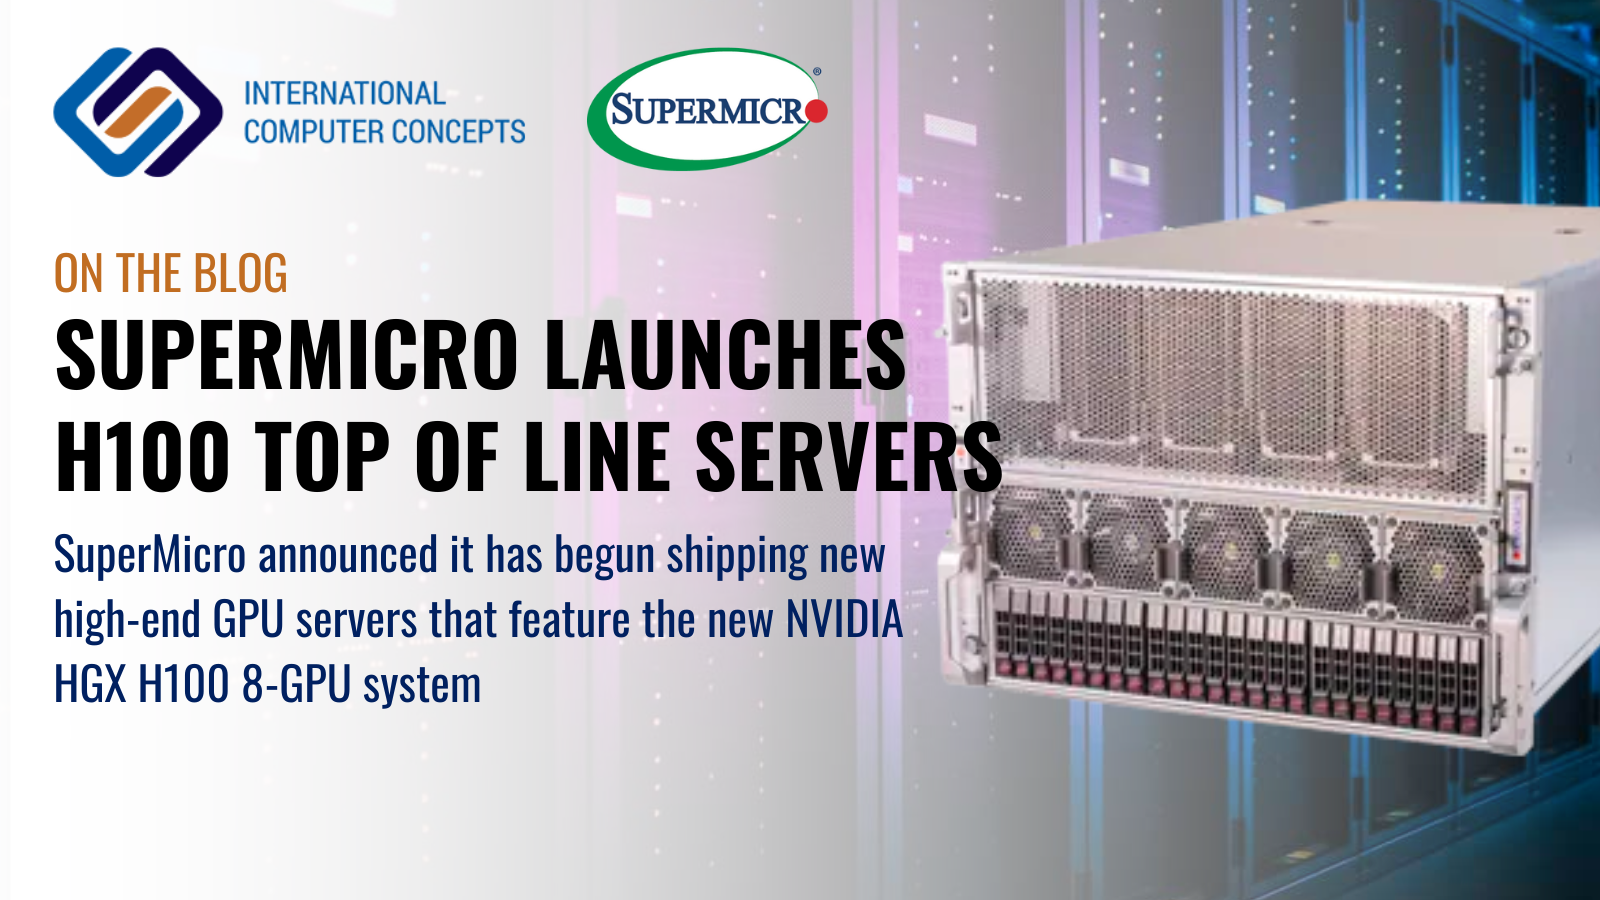 SuperMicro launches H100 Top of Line servers for AI training, Deep Learning and HPC